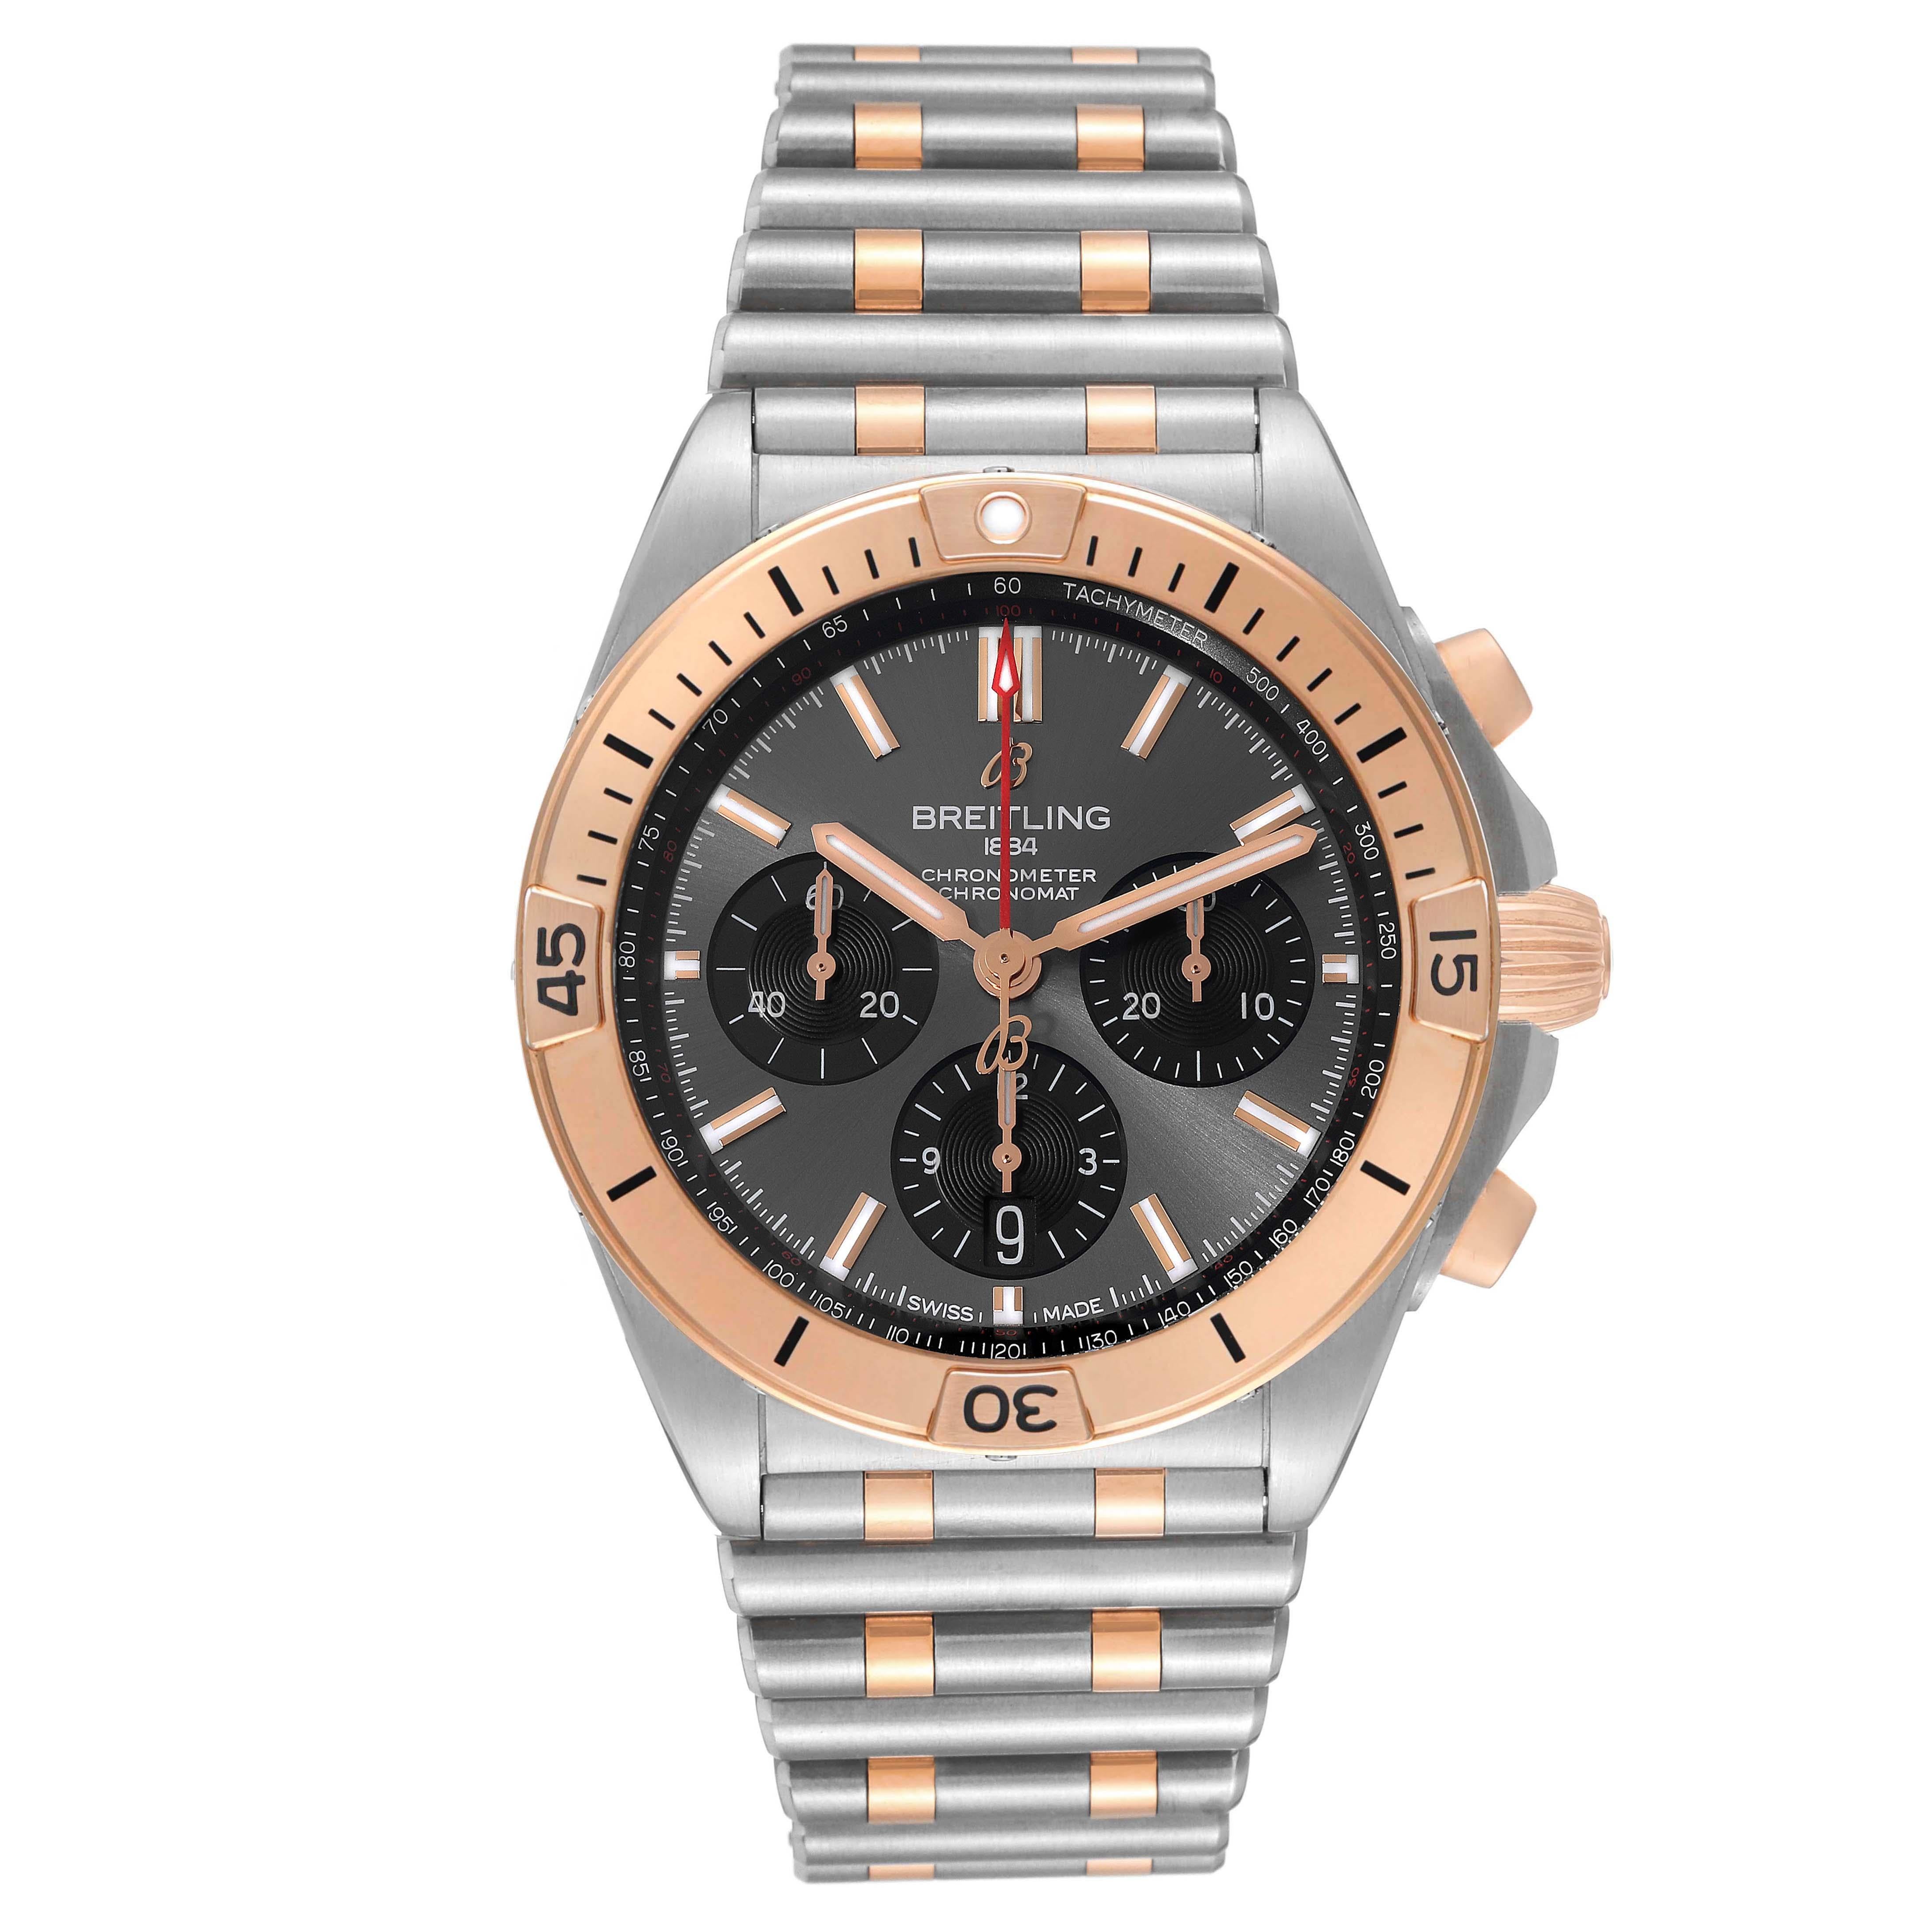 Breitling Chronomat B01 Steel Rose Gold Grey Dial Mens Watch UB0134 Box Card. Self-winding automatic officially certified chronometer movement. Chronograph function. Stainless steel case 42.0 mm in diameter with 18k rose gold pushers and screw-down